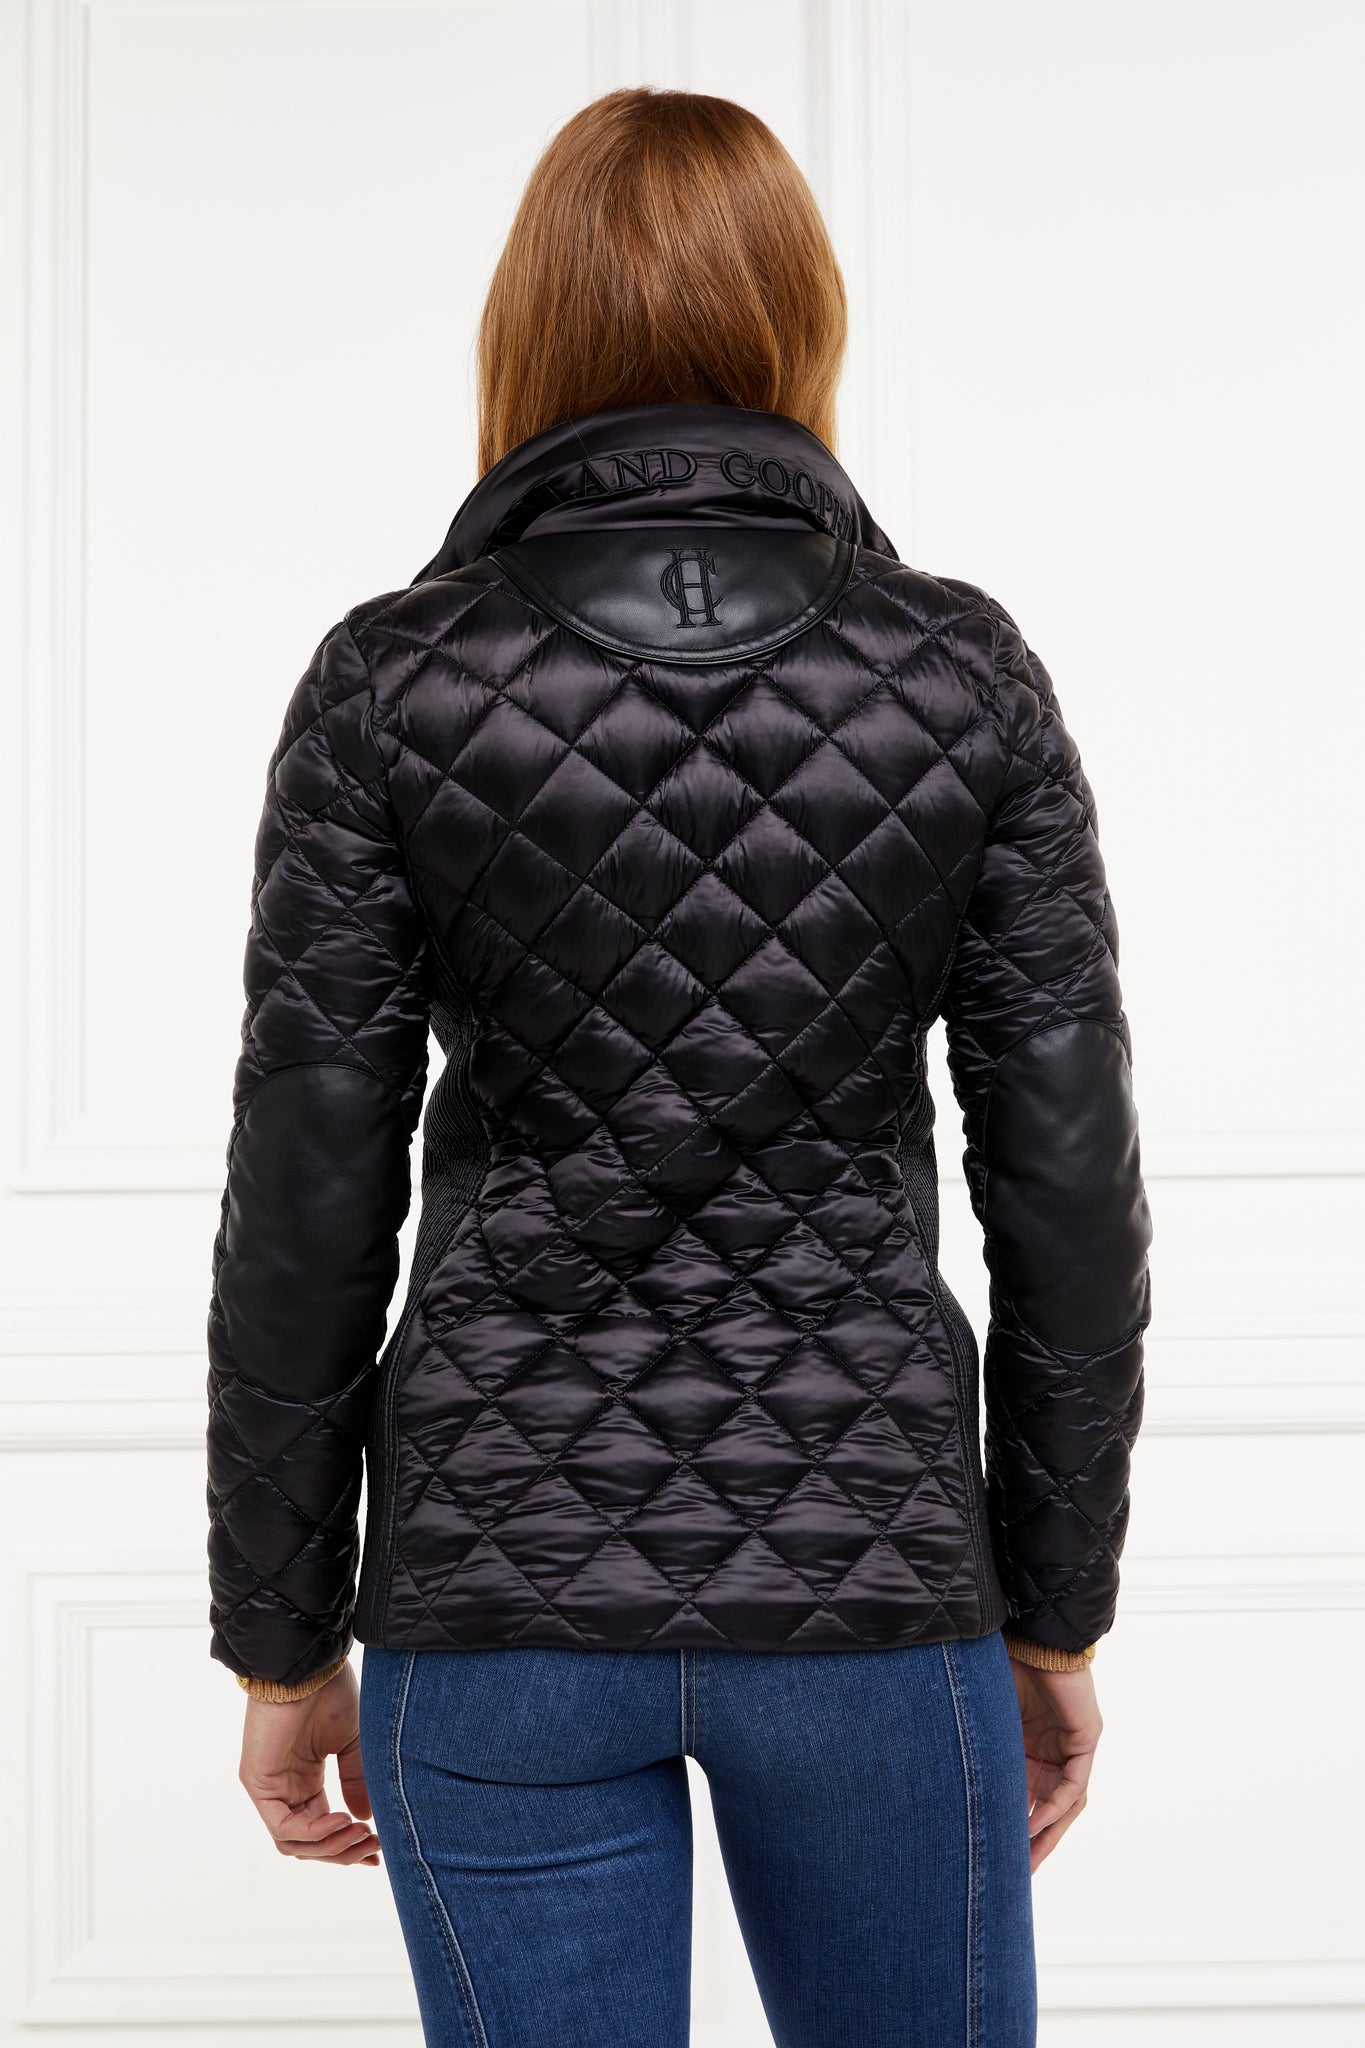  back of womens diamond quilted black jacket with contrast black leather elbow and shoulder pads large front pockets and shirred side panels